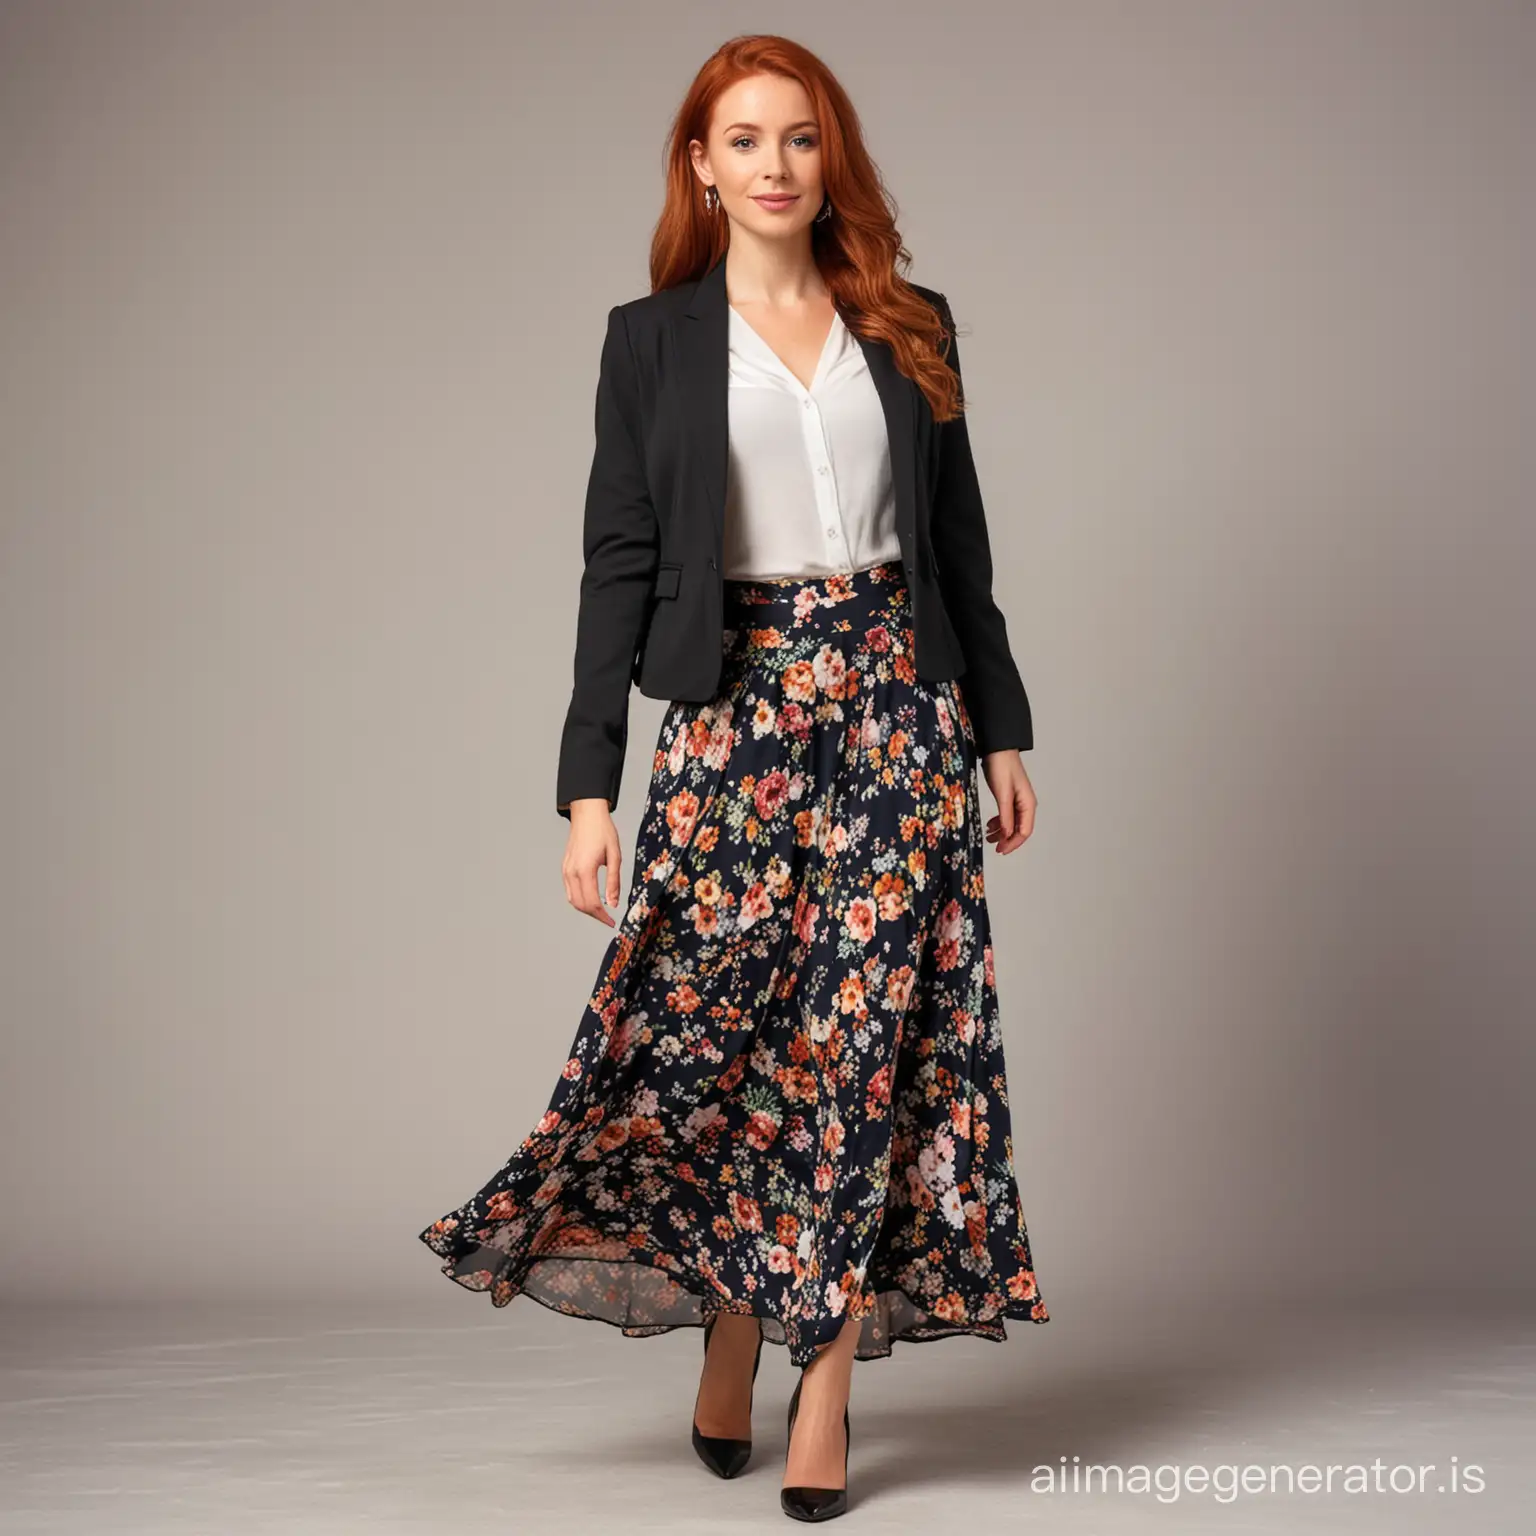 Stylish-Petite-Redhead-Businesswoman-in-Floral-Maxi-Skirt-and-Jacket